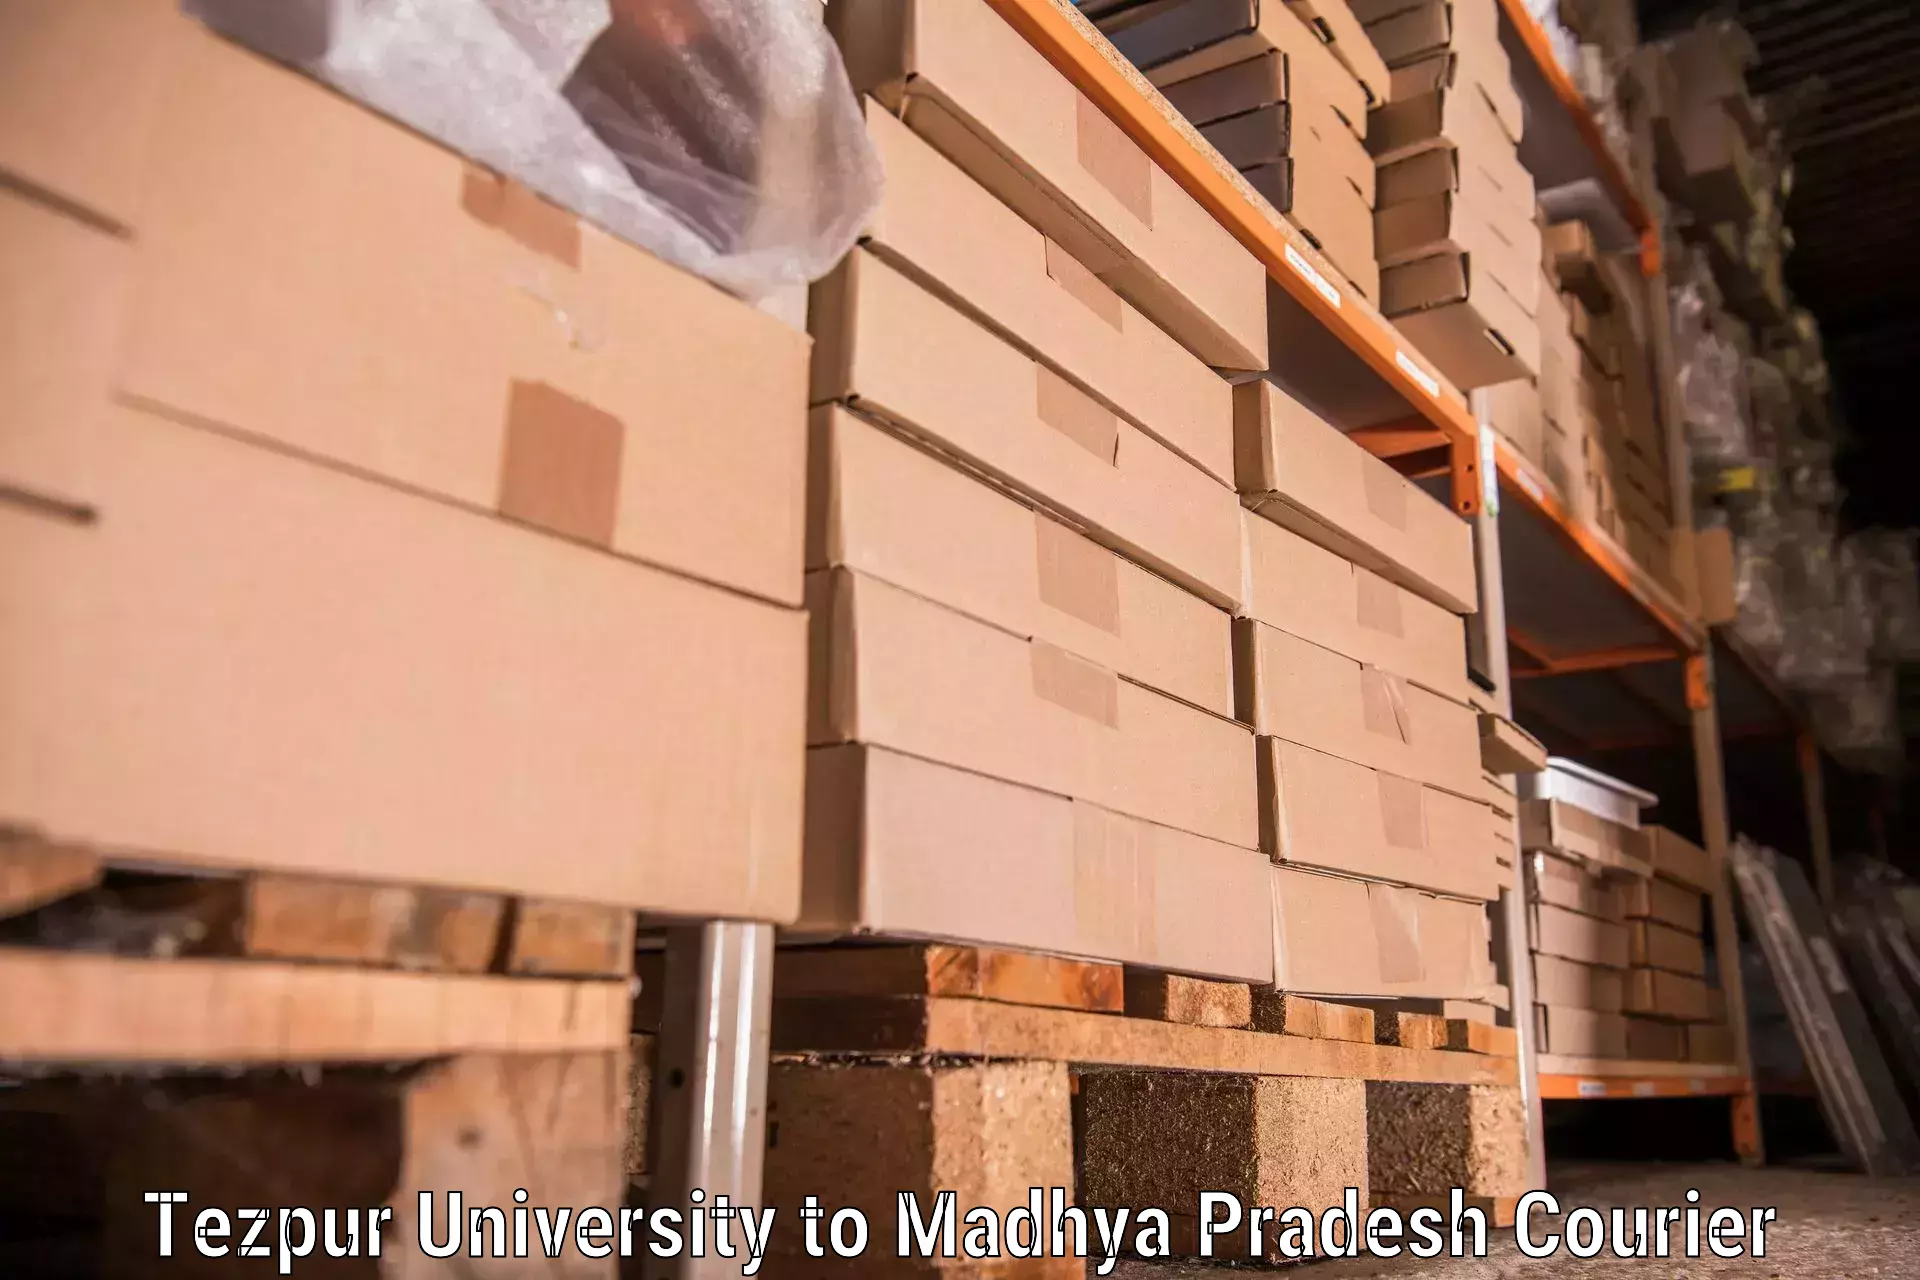 Furniture shipping services Tezpur University to Anuppur